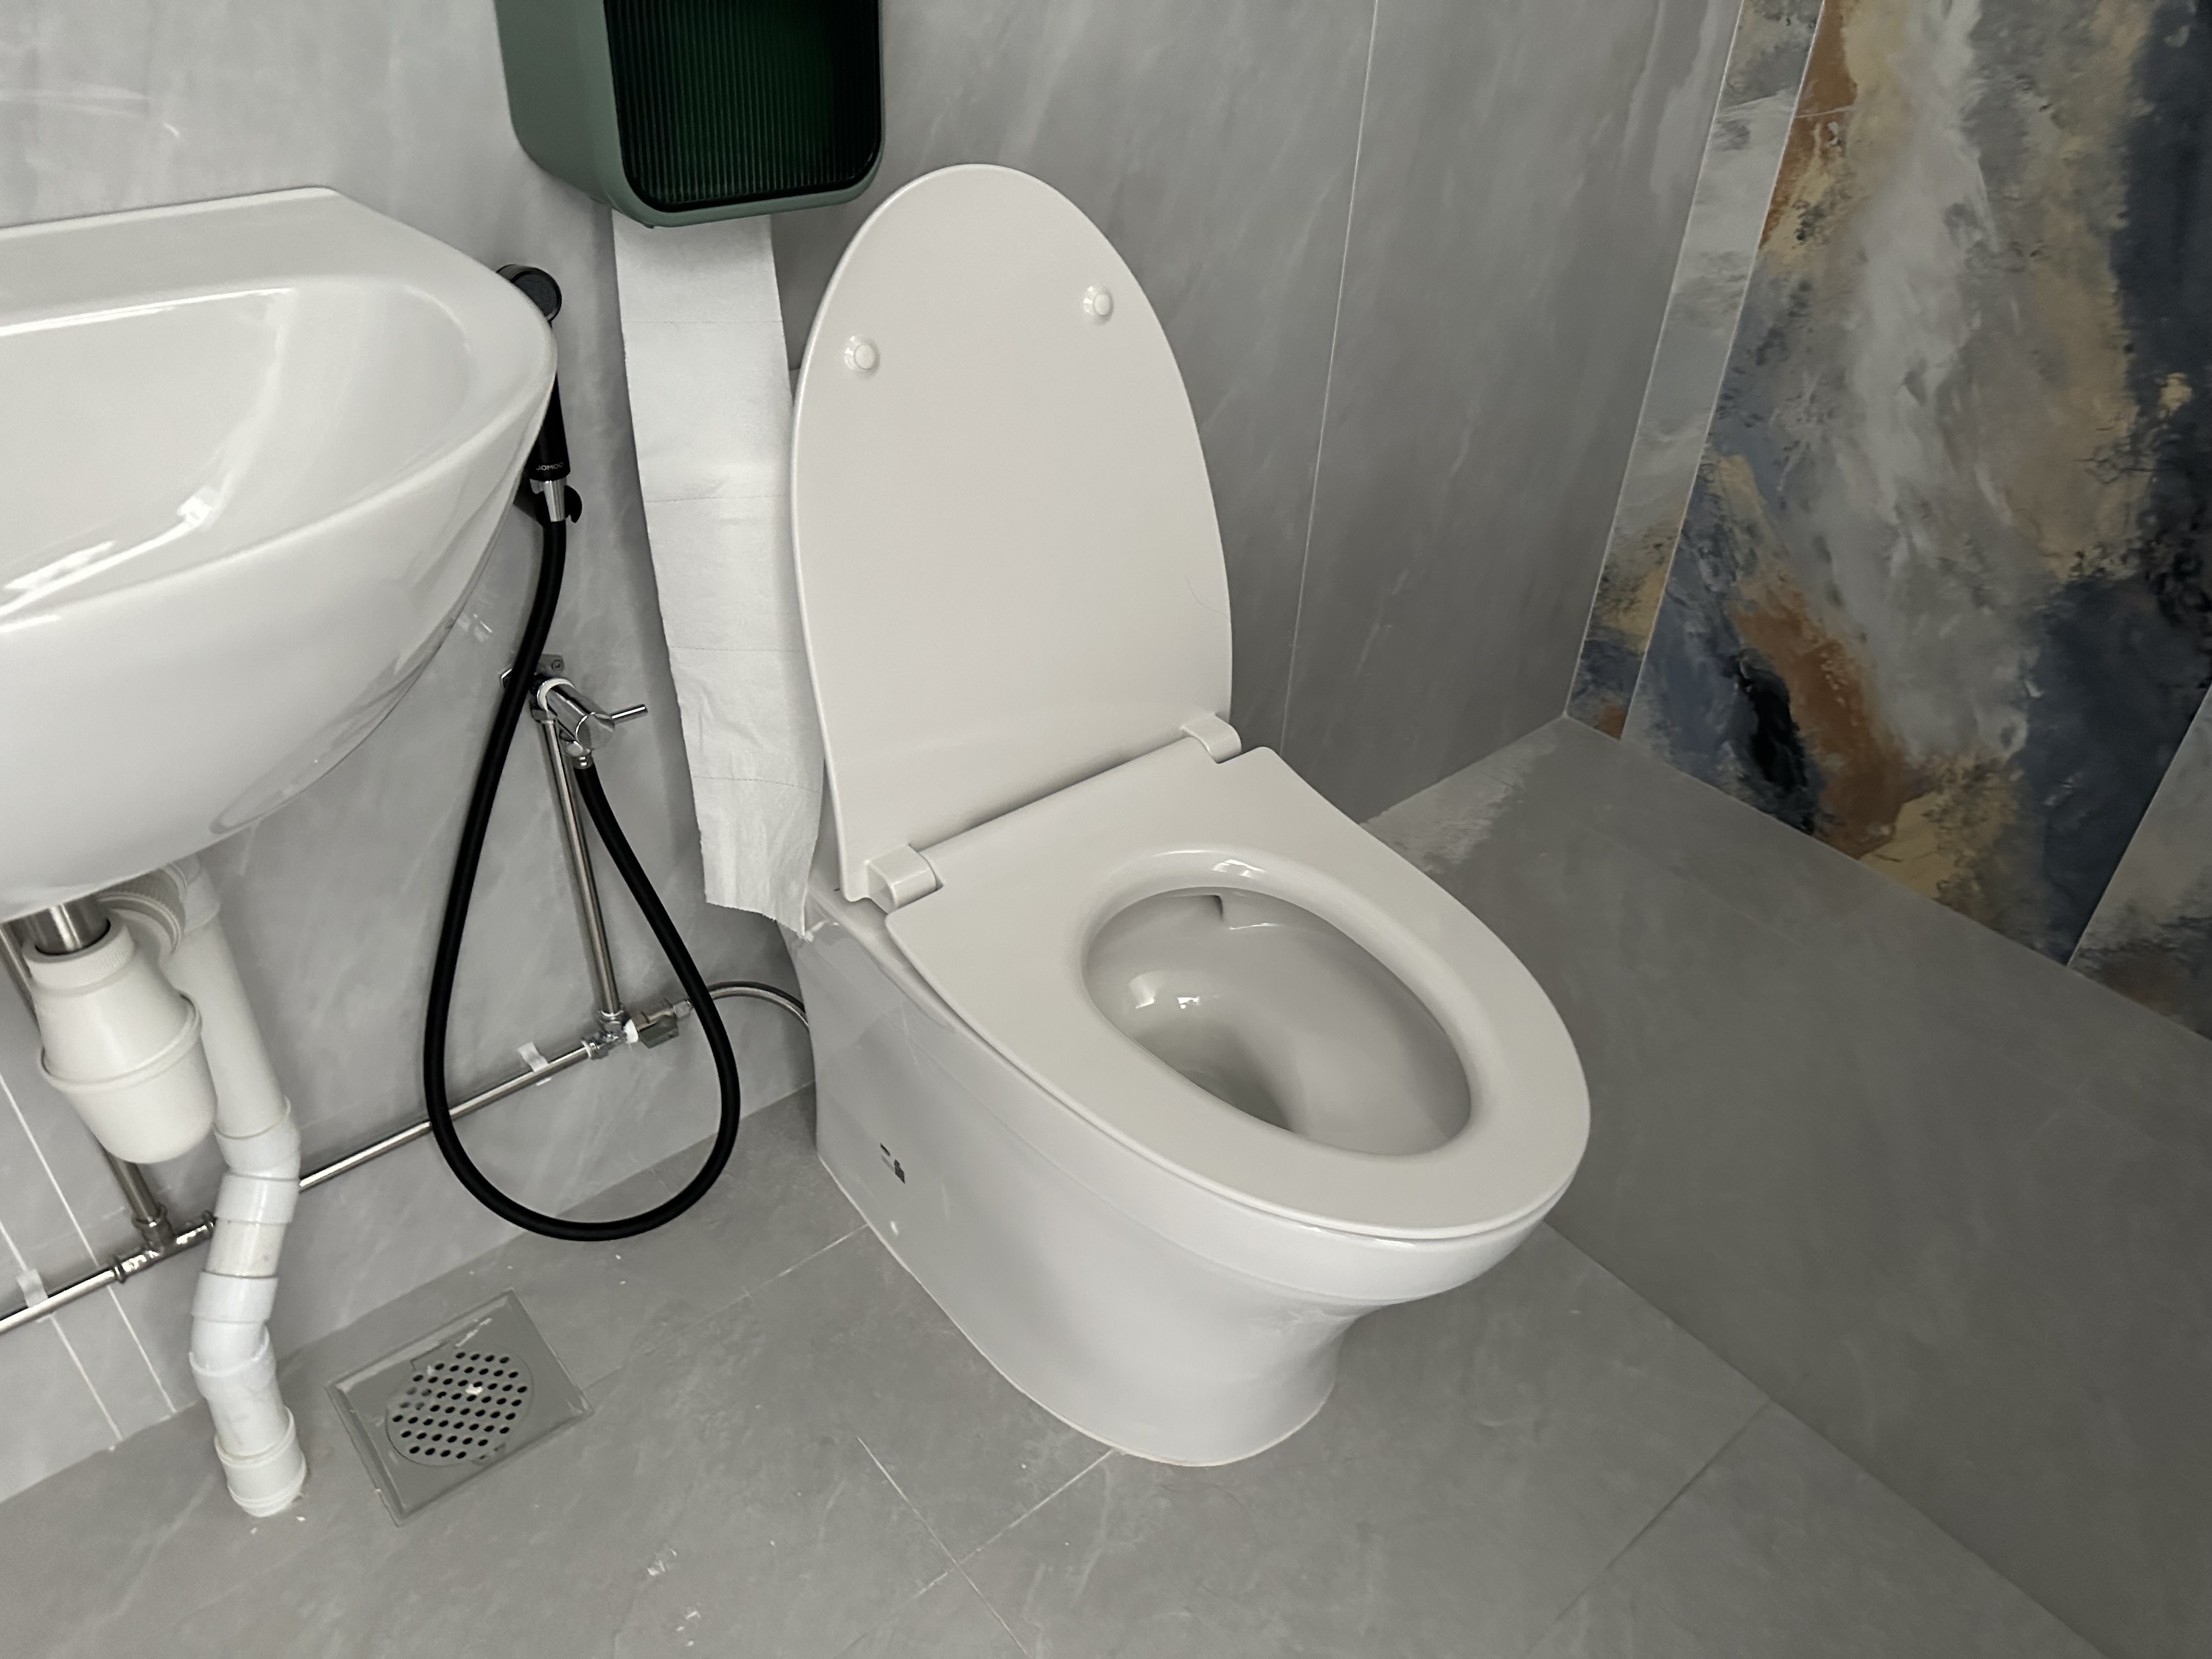 New toilet bowl and seat in a newly renovated HDB flat.